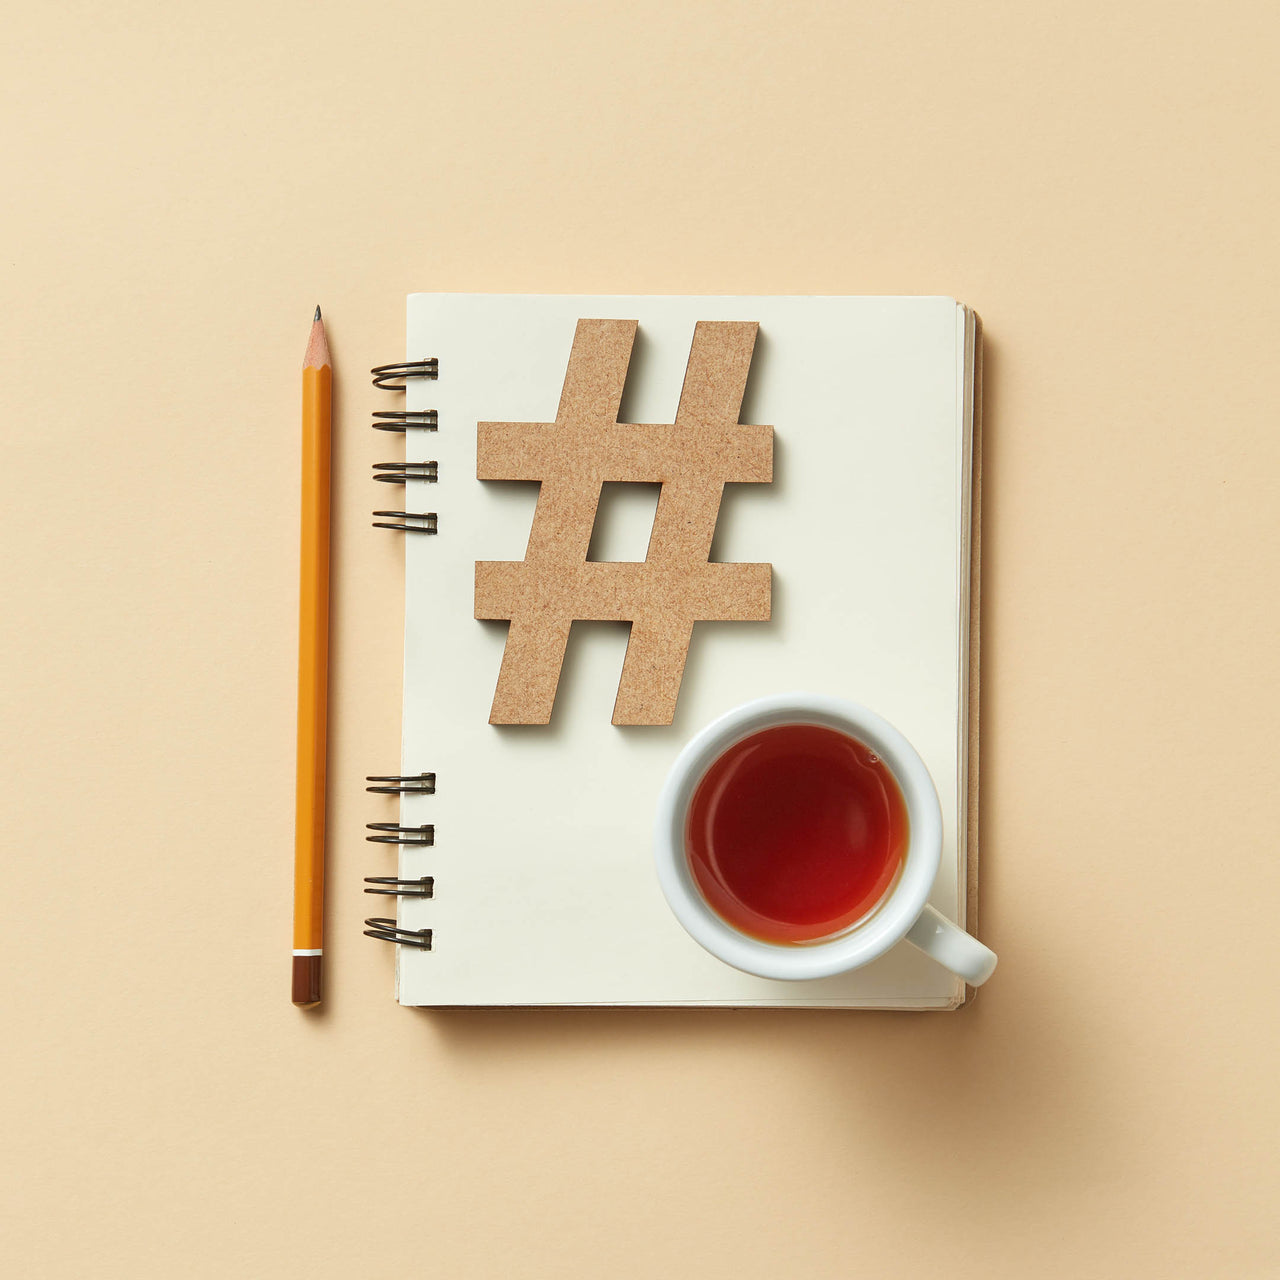 700+ Hashtags for Artists